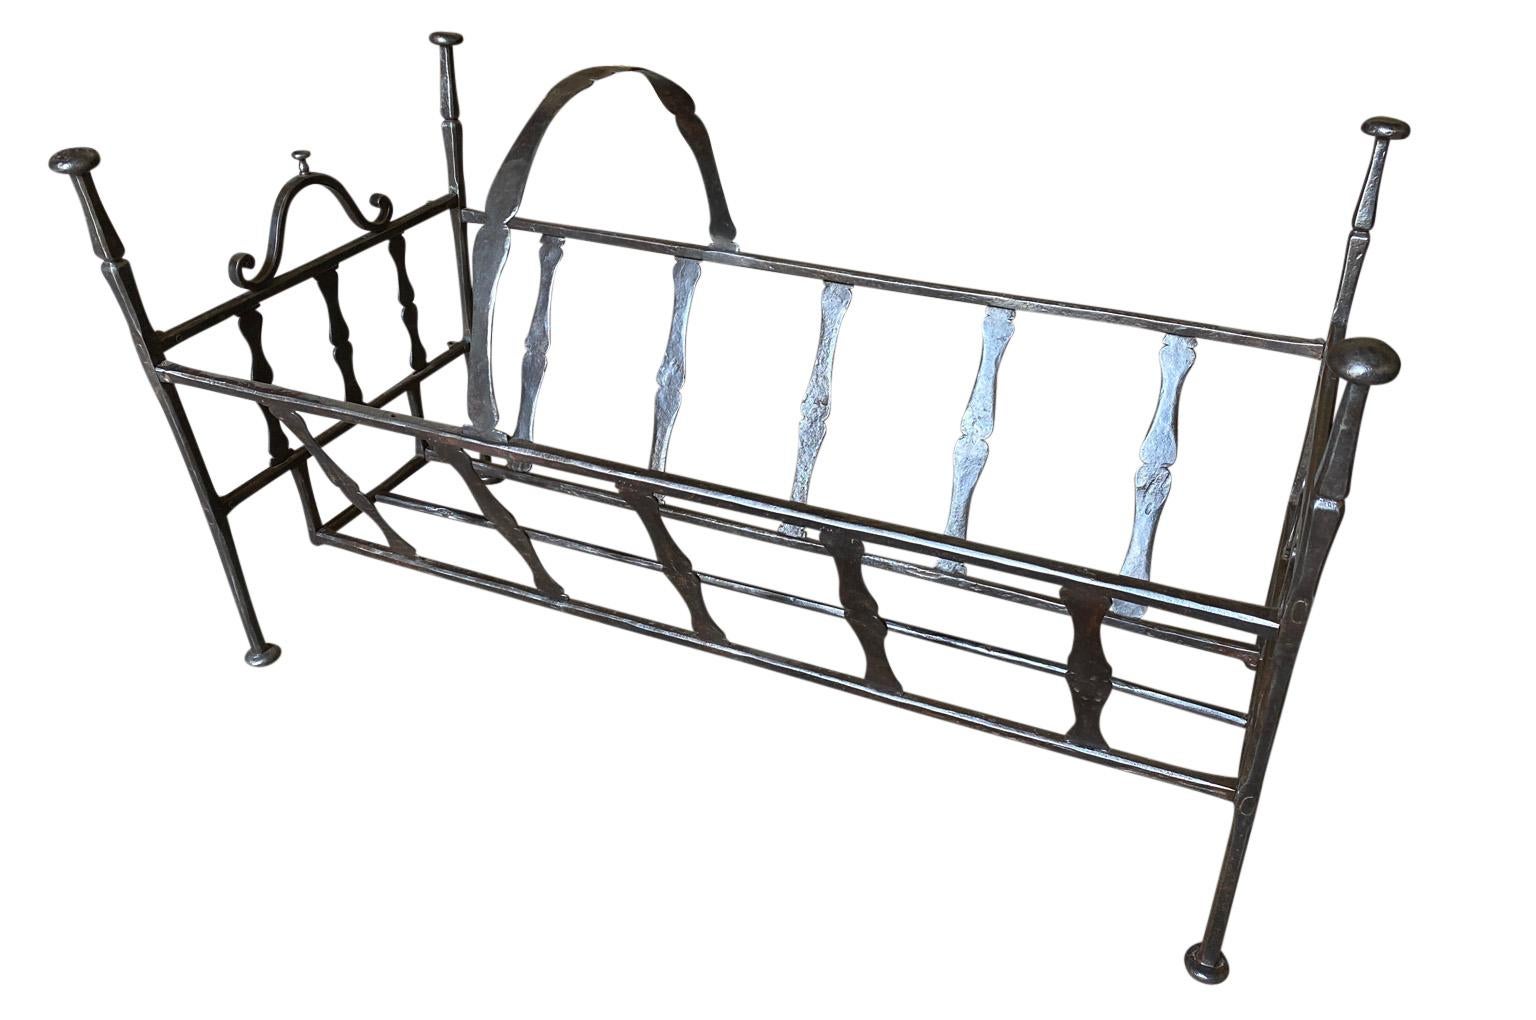 A very handsome 17th century cradle - baby bed from the South of France. Wonderful constructed from forged iron. Wonderful to line the interior and use whether to store fire wood or to plant.